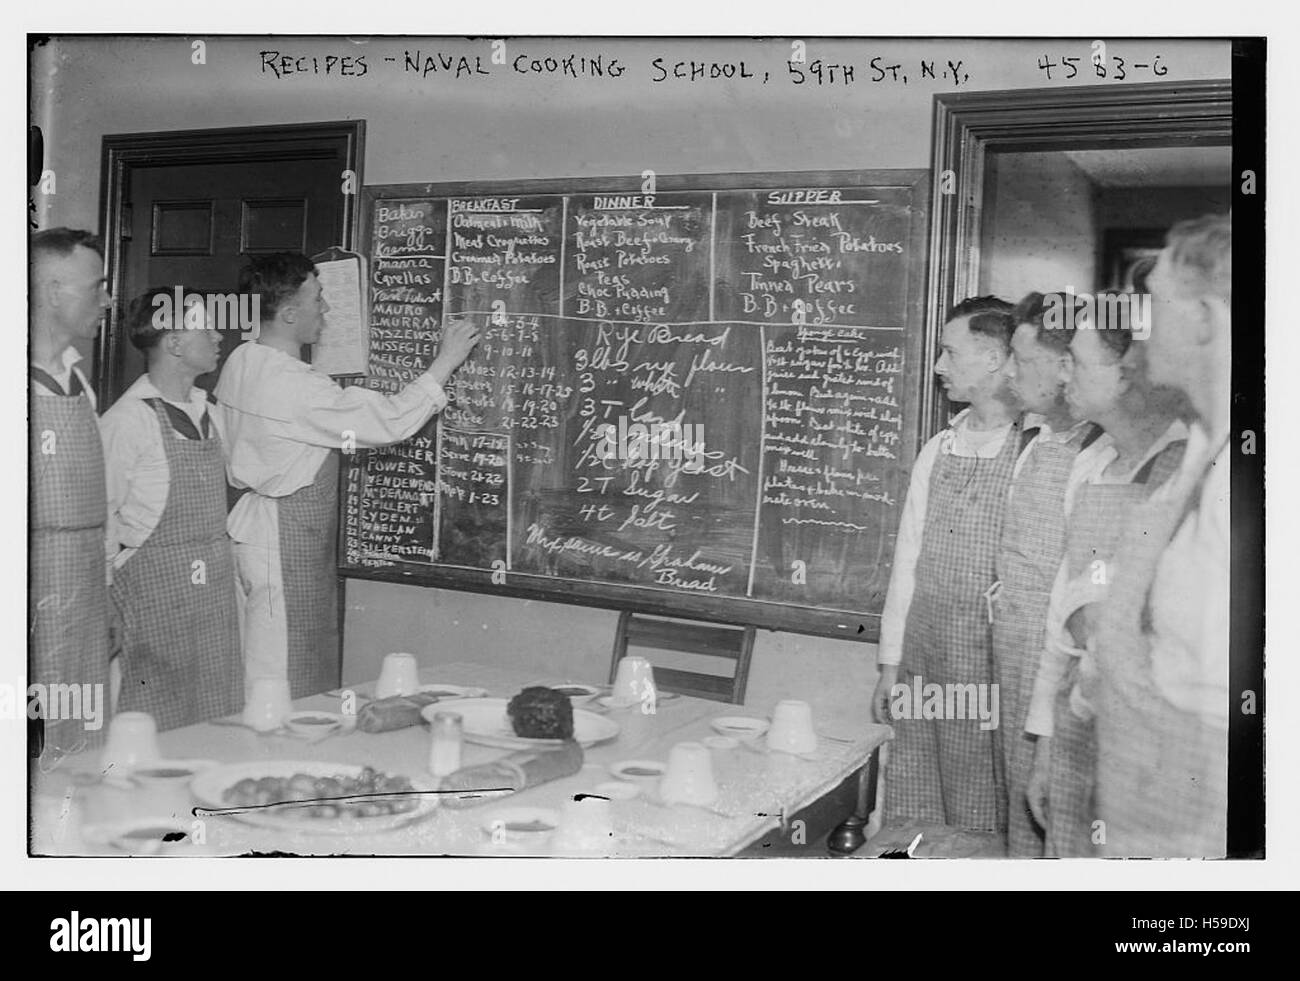 Recipes -- Naval cooking school 59th St Stock Photo